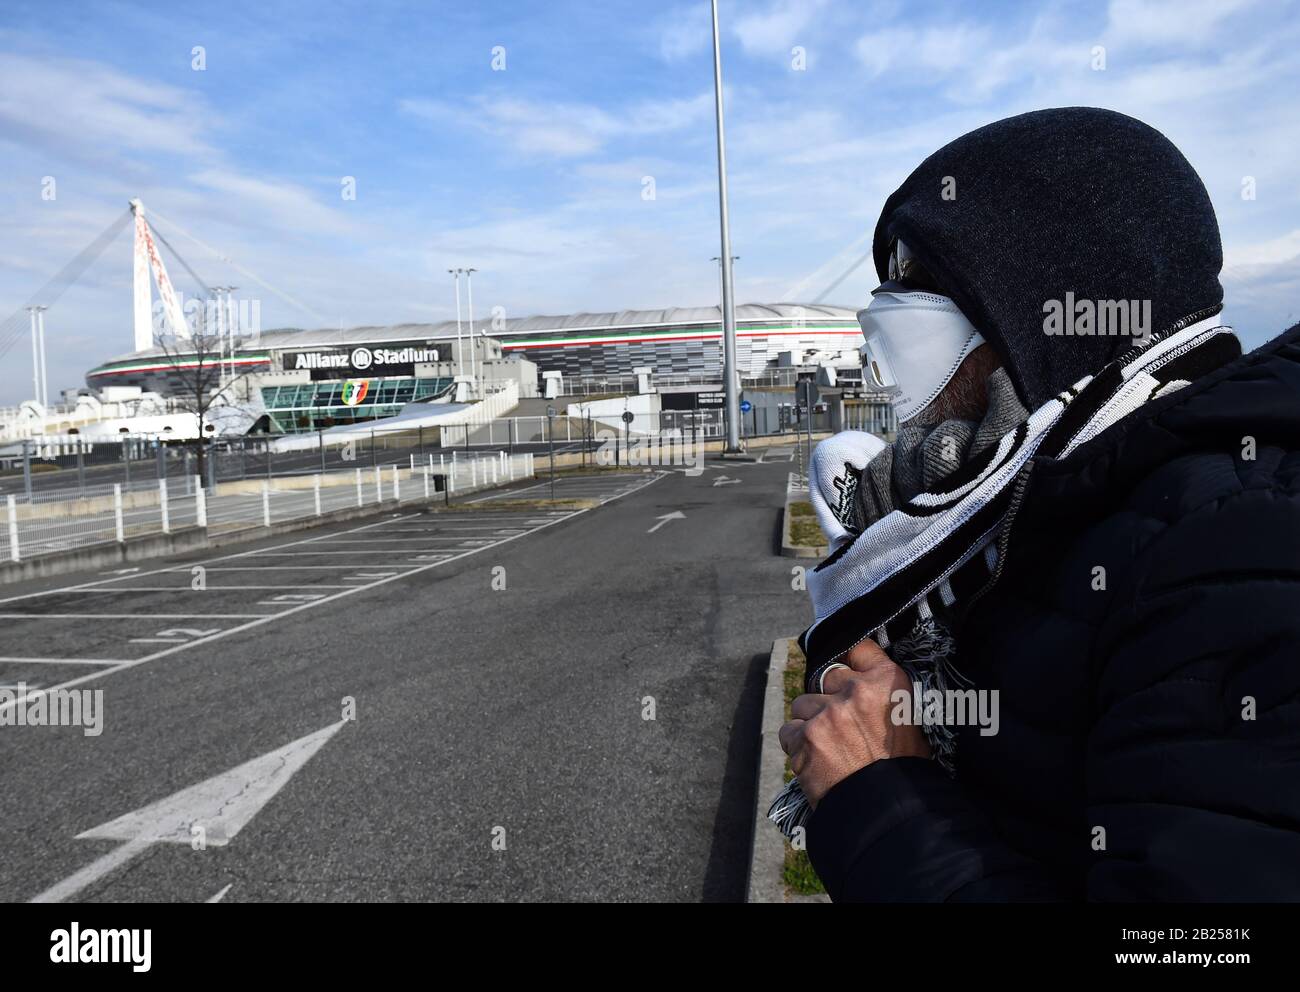 Rome, Italy. 29th Feb, 2020. A man wearing a face mask is seen outside the Allianz Stadium, after five Serie A matches were postponed because of the ongoing coronavirus epidemic, in Turin, Italy, Feb. 29, 2020. A total of 1,049 people tested positive for the novel coronavirus in Italy, Civil Protection Department chief and Extraordinary Commissioner for the coronavirus emergency Angelo Borrelli said on Saturday. Credit: Federico Tardito/Xinhua/Alamy Live News Stock Photo